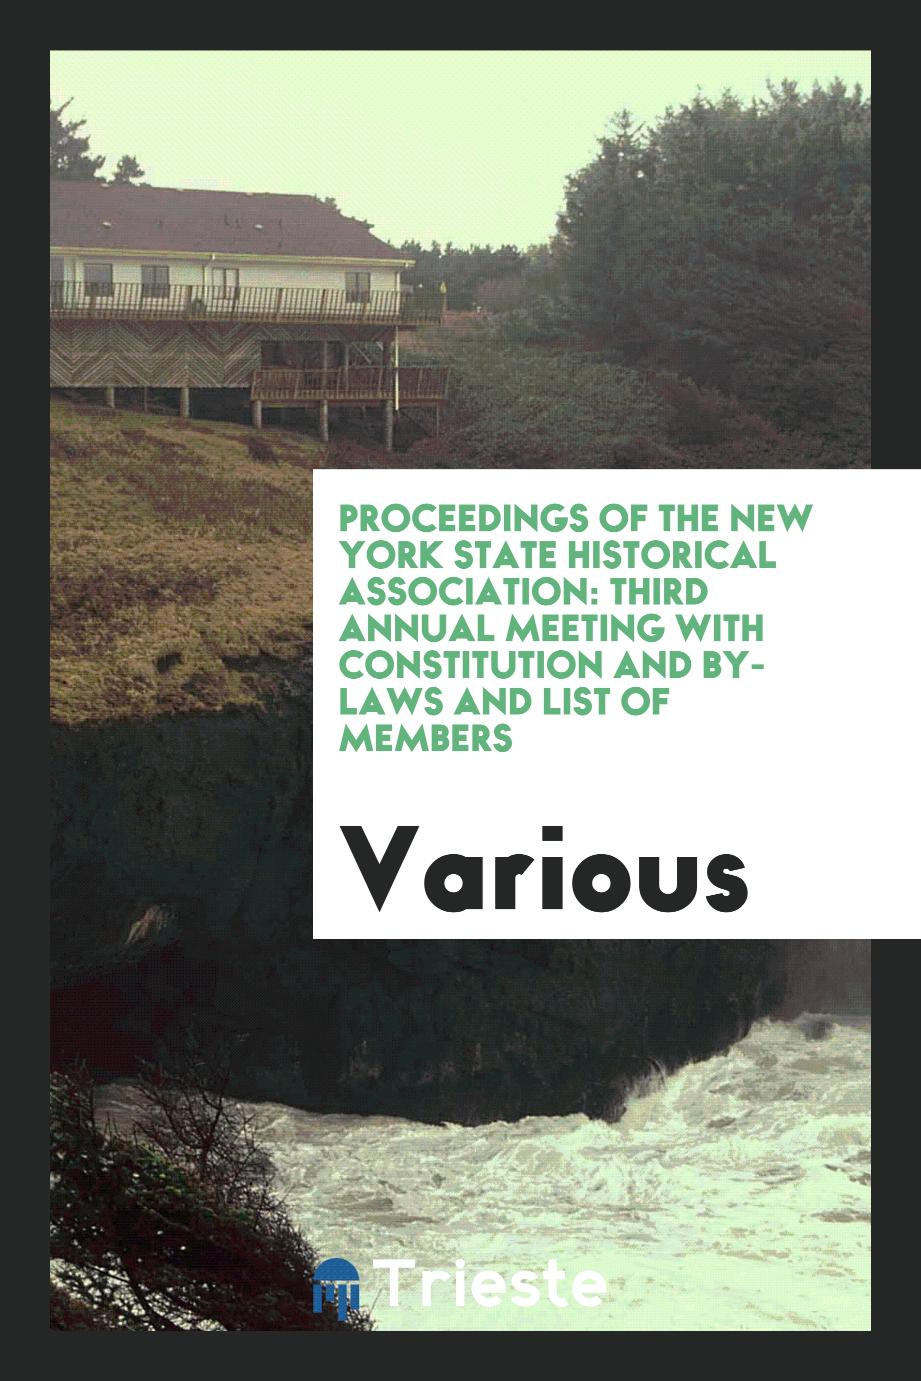 Proceedings of the New York State Historical Association: Third Annual Meeting with Constitution and by-laws and list of members